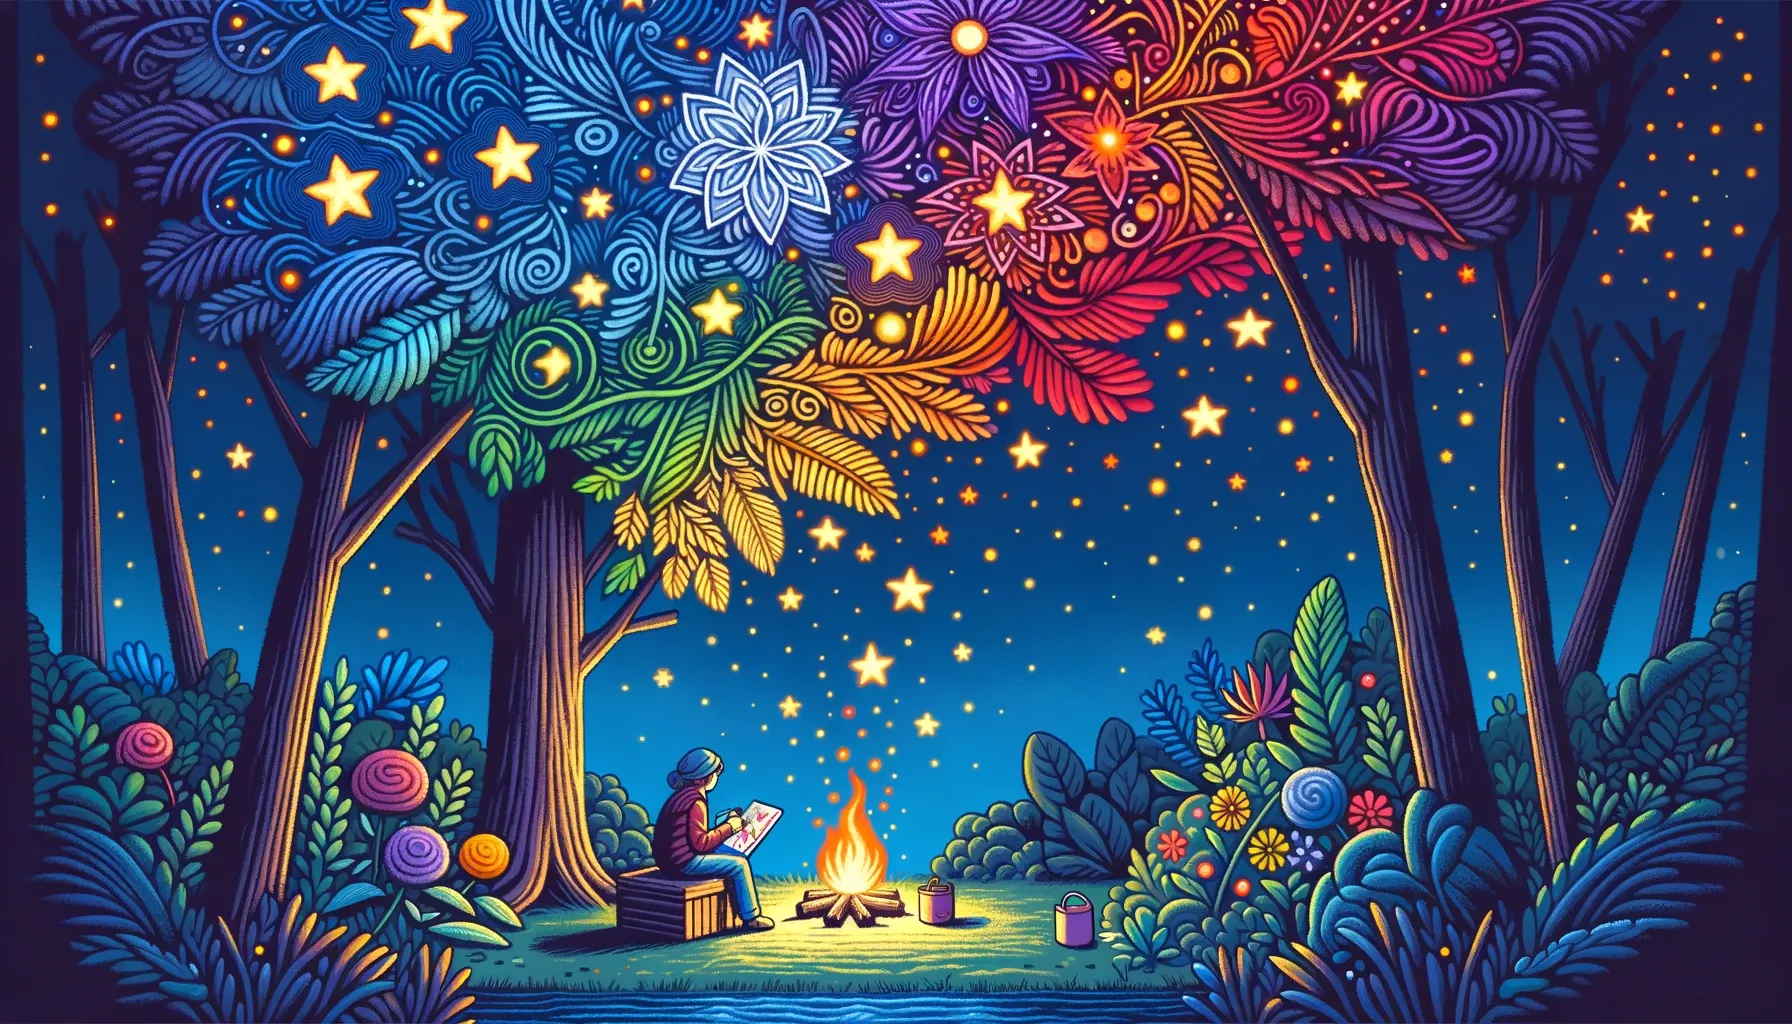 Wide illustration: A serene twilight scene in the brain garden. Under a canopy of colorful patterned stars, a gardener sits by a campfire, coloring a garden blueprint. The surrounding plants and flowers seem to respond, glowing brighter with each stroke of color.